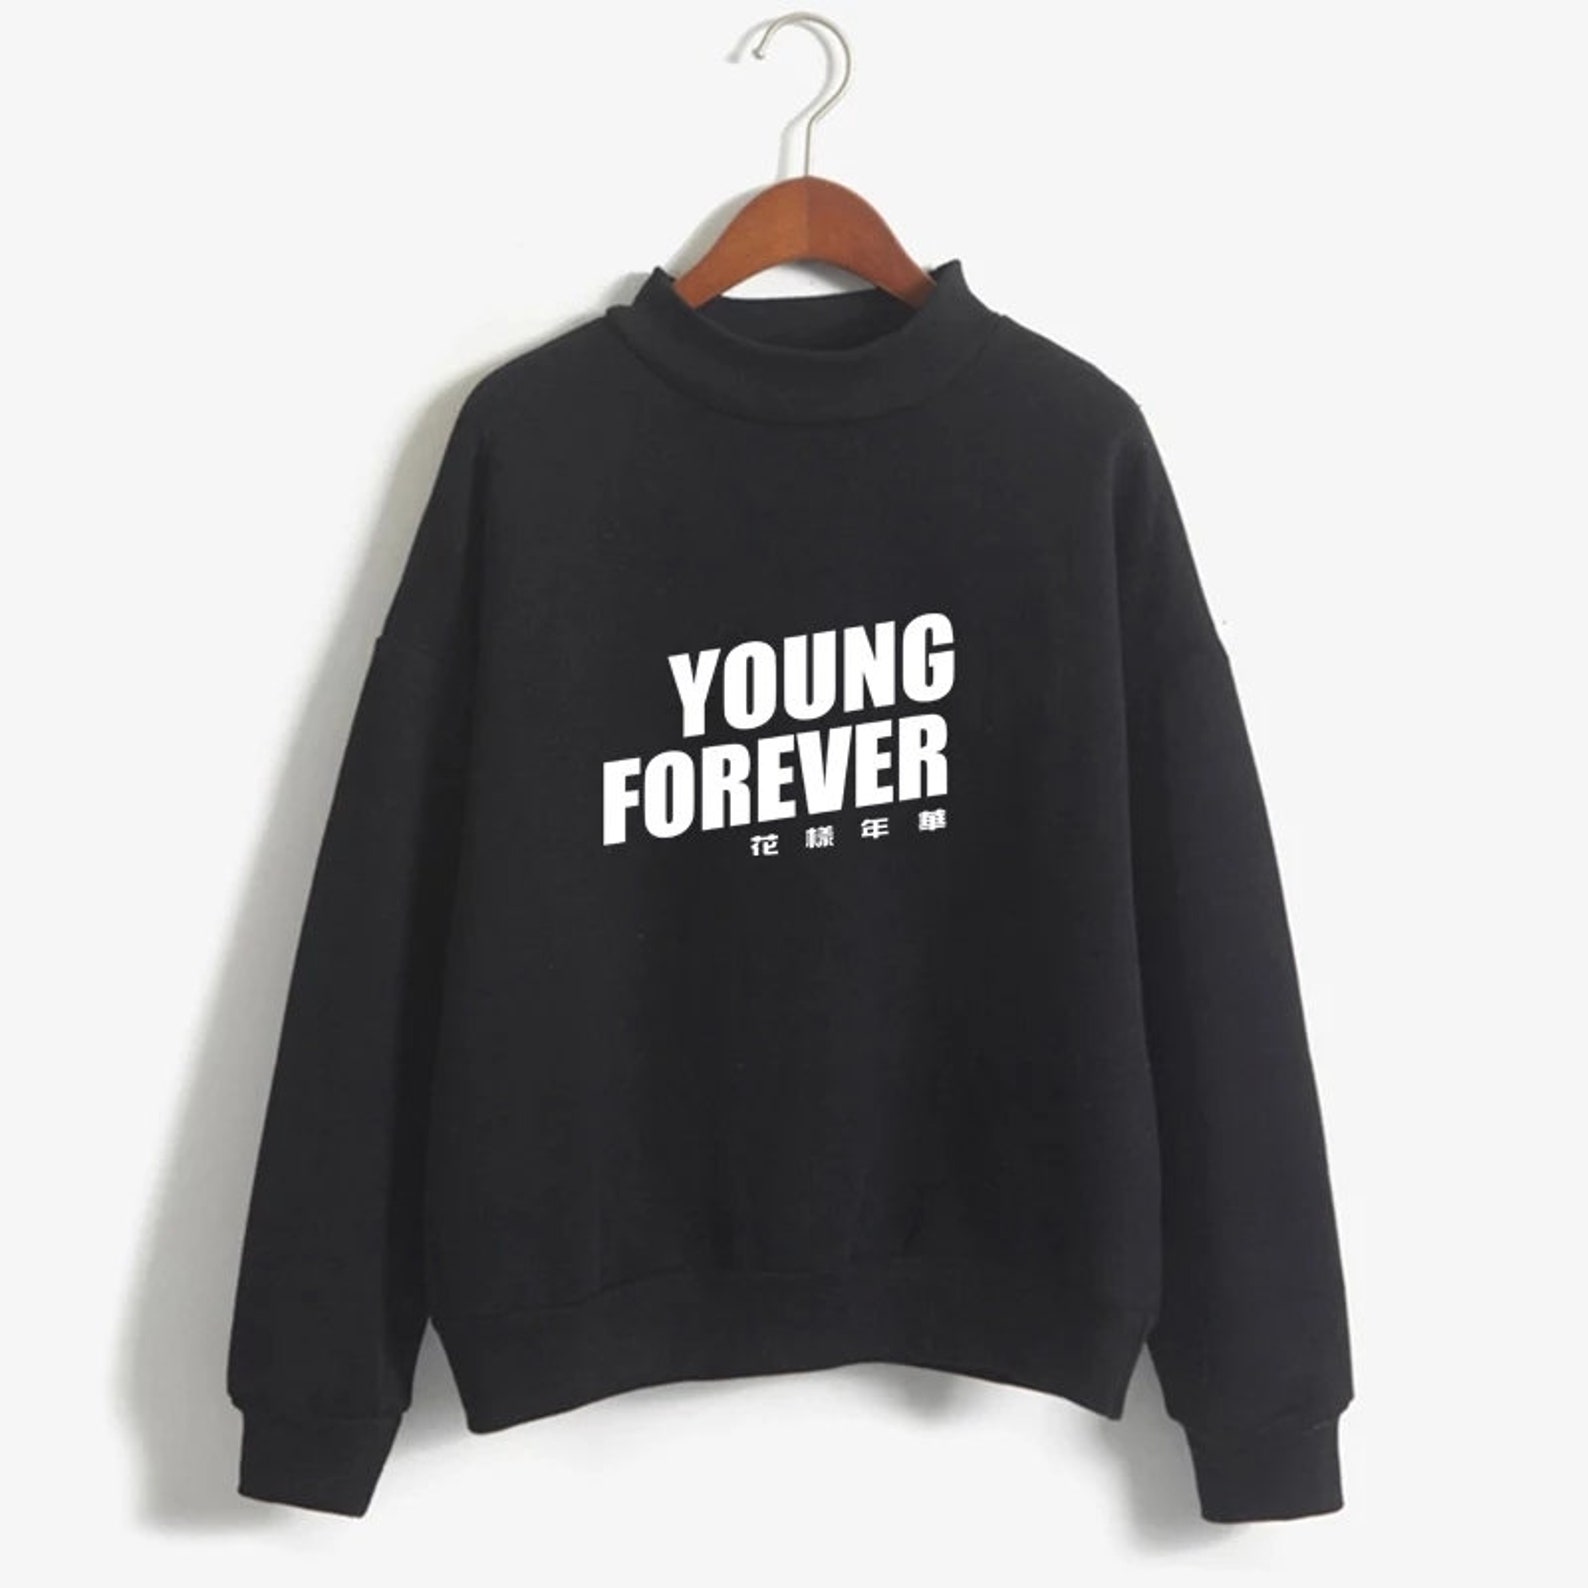 BTS young forever inspired sweater jumper pull over aesthetic | Etsy